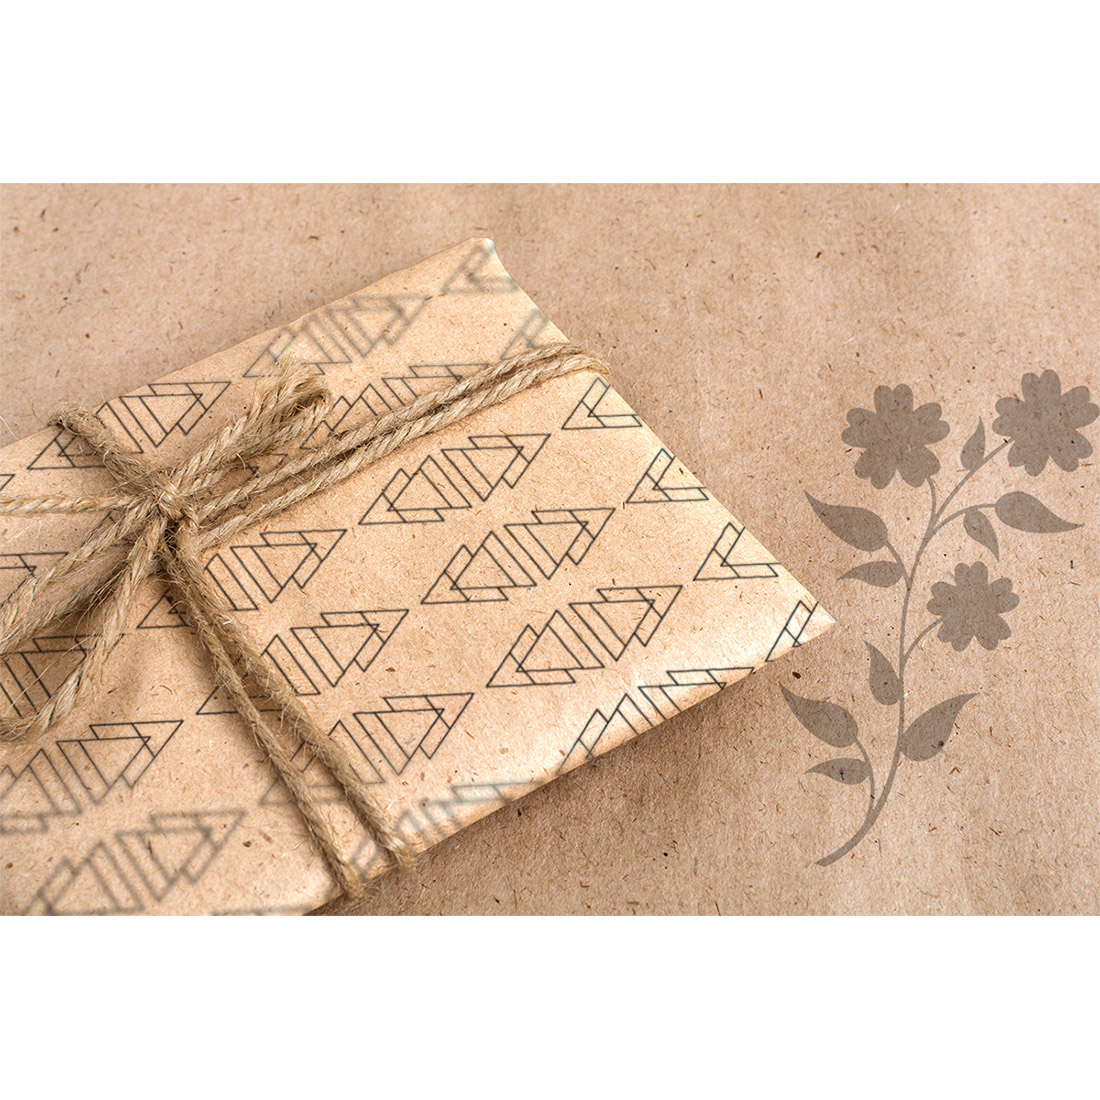 Image with wrapping paper with enchanting geometric patterns